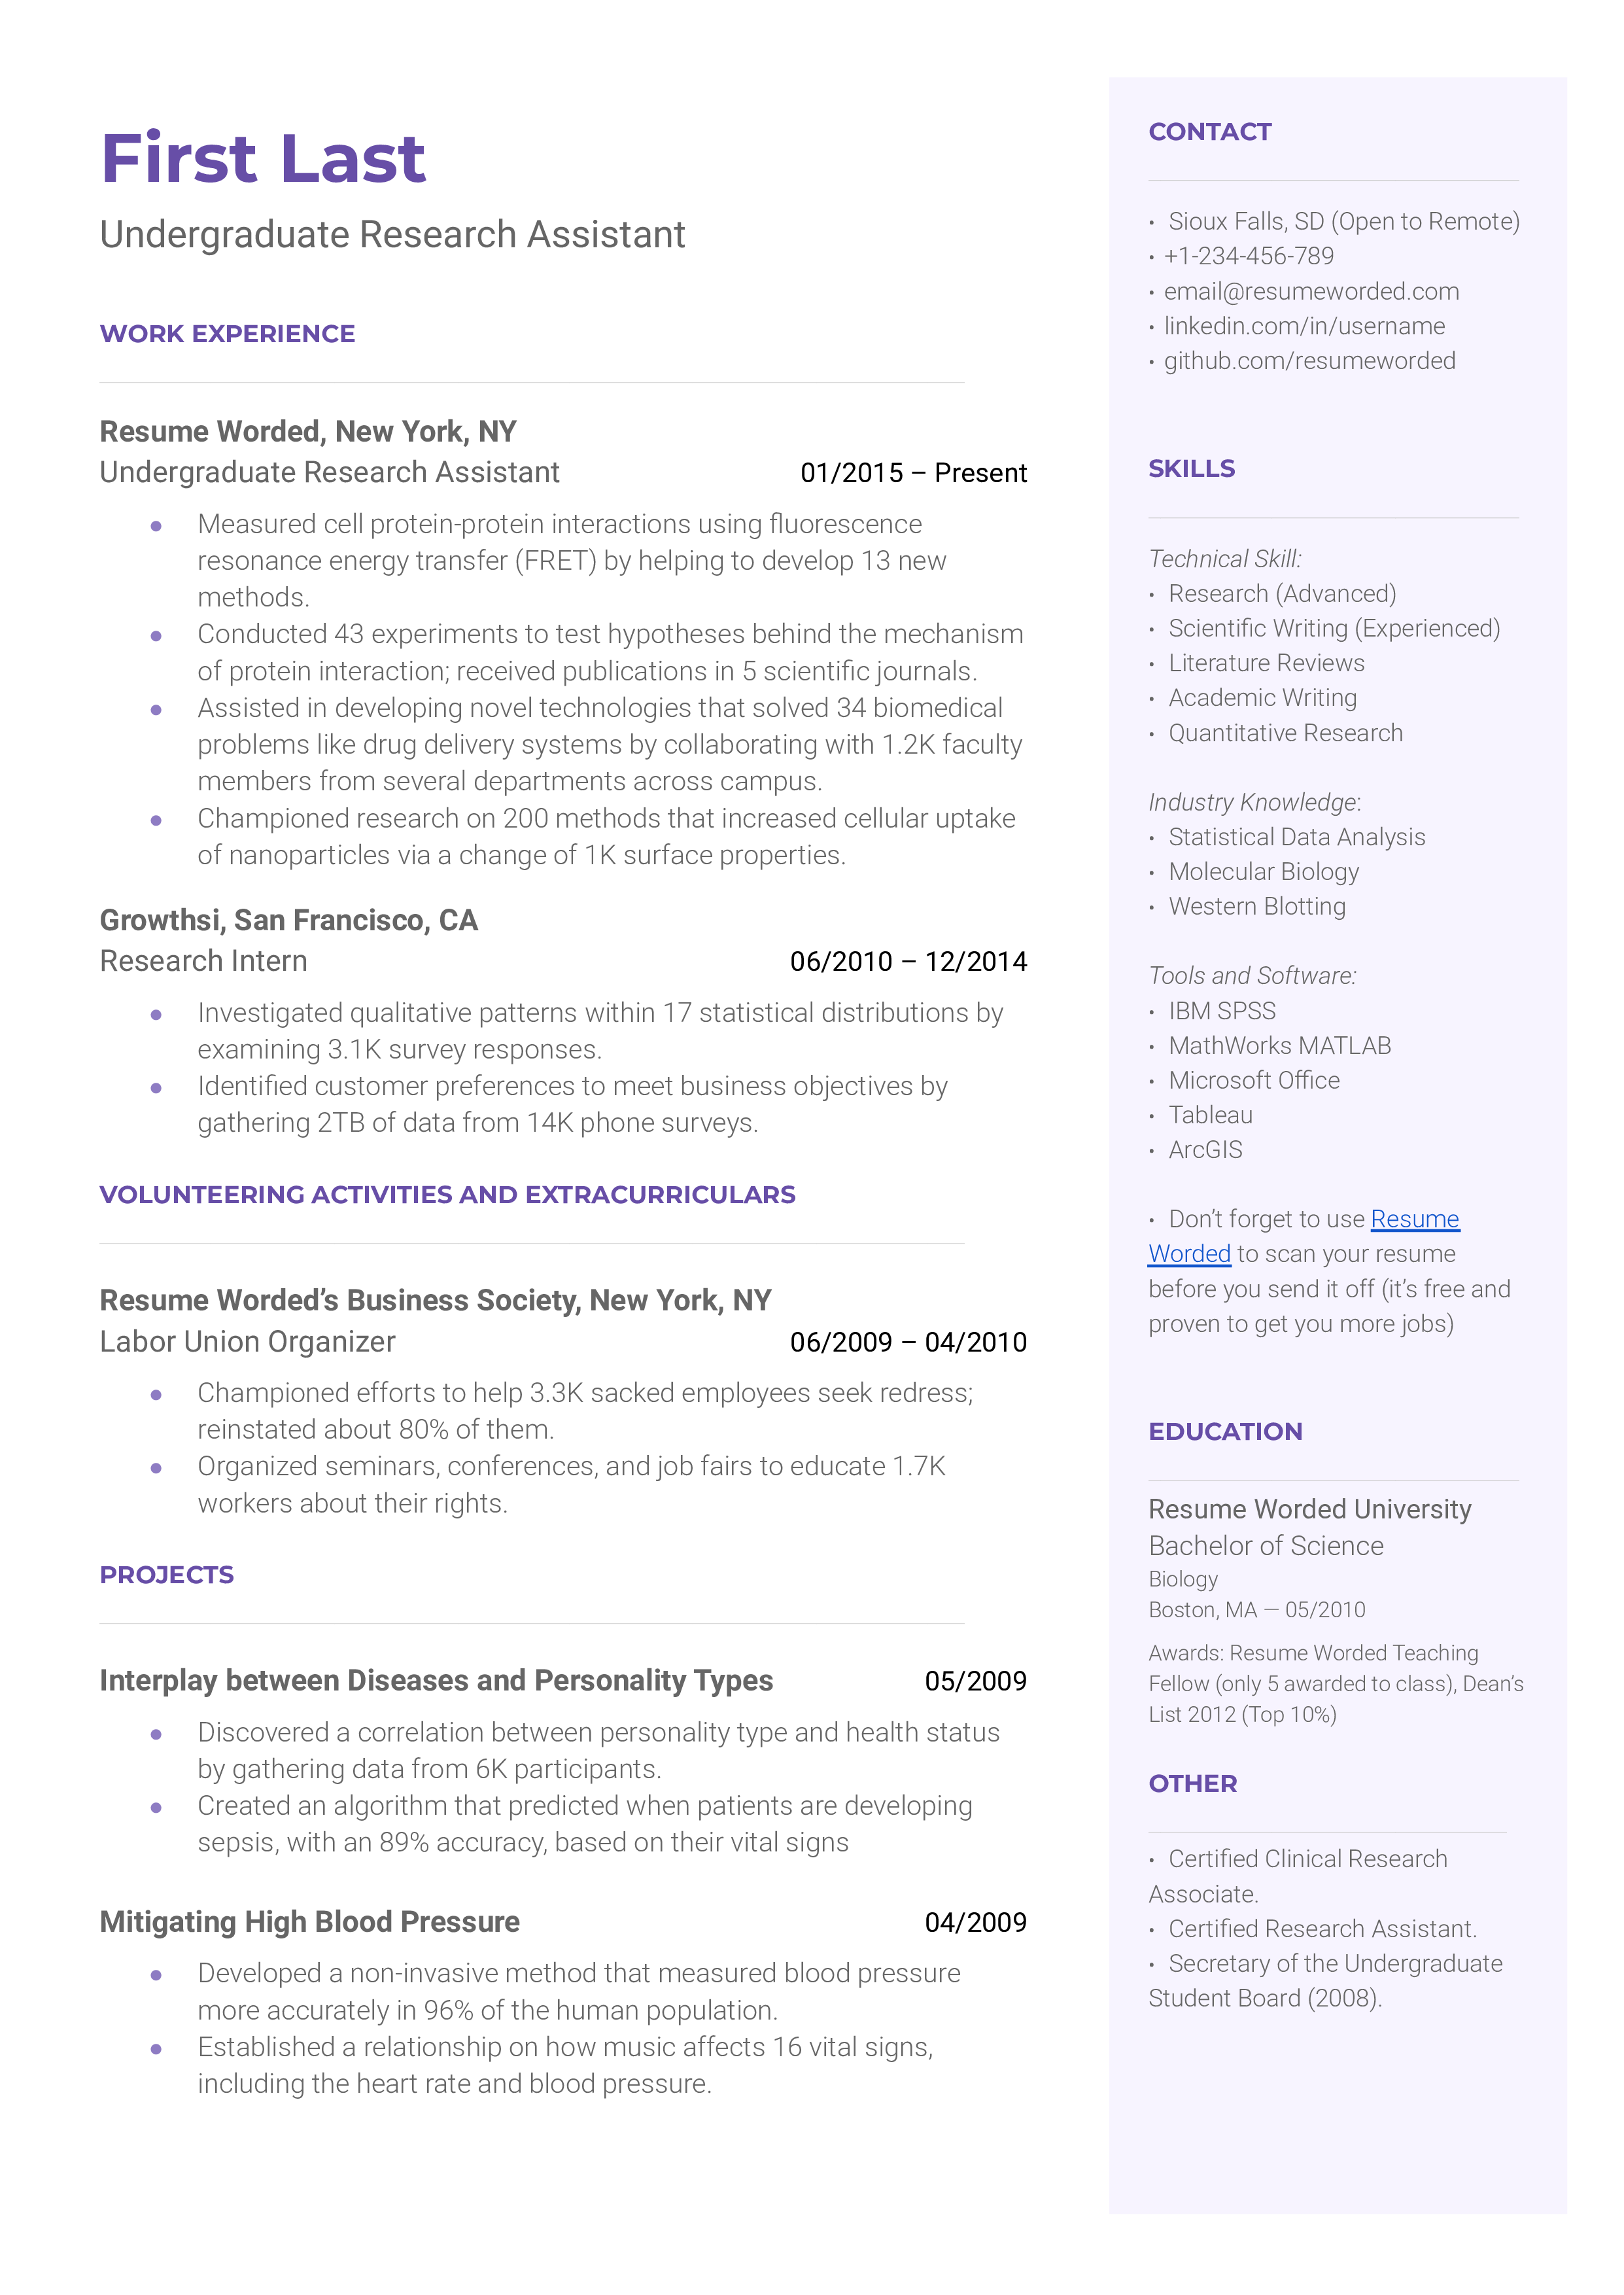 A resume for an undergraduate researcg assistant featuring a biology degree, several published research articles, and previous jobs.